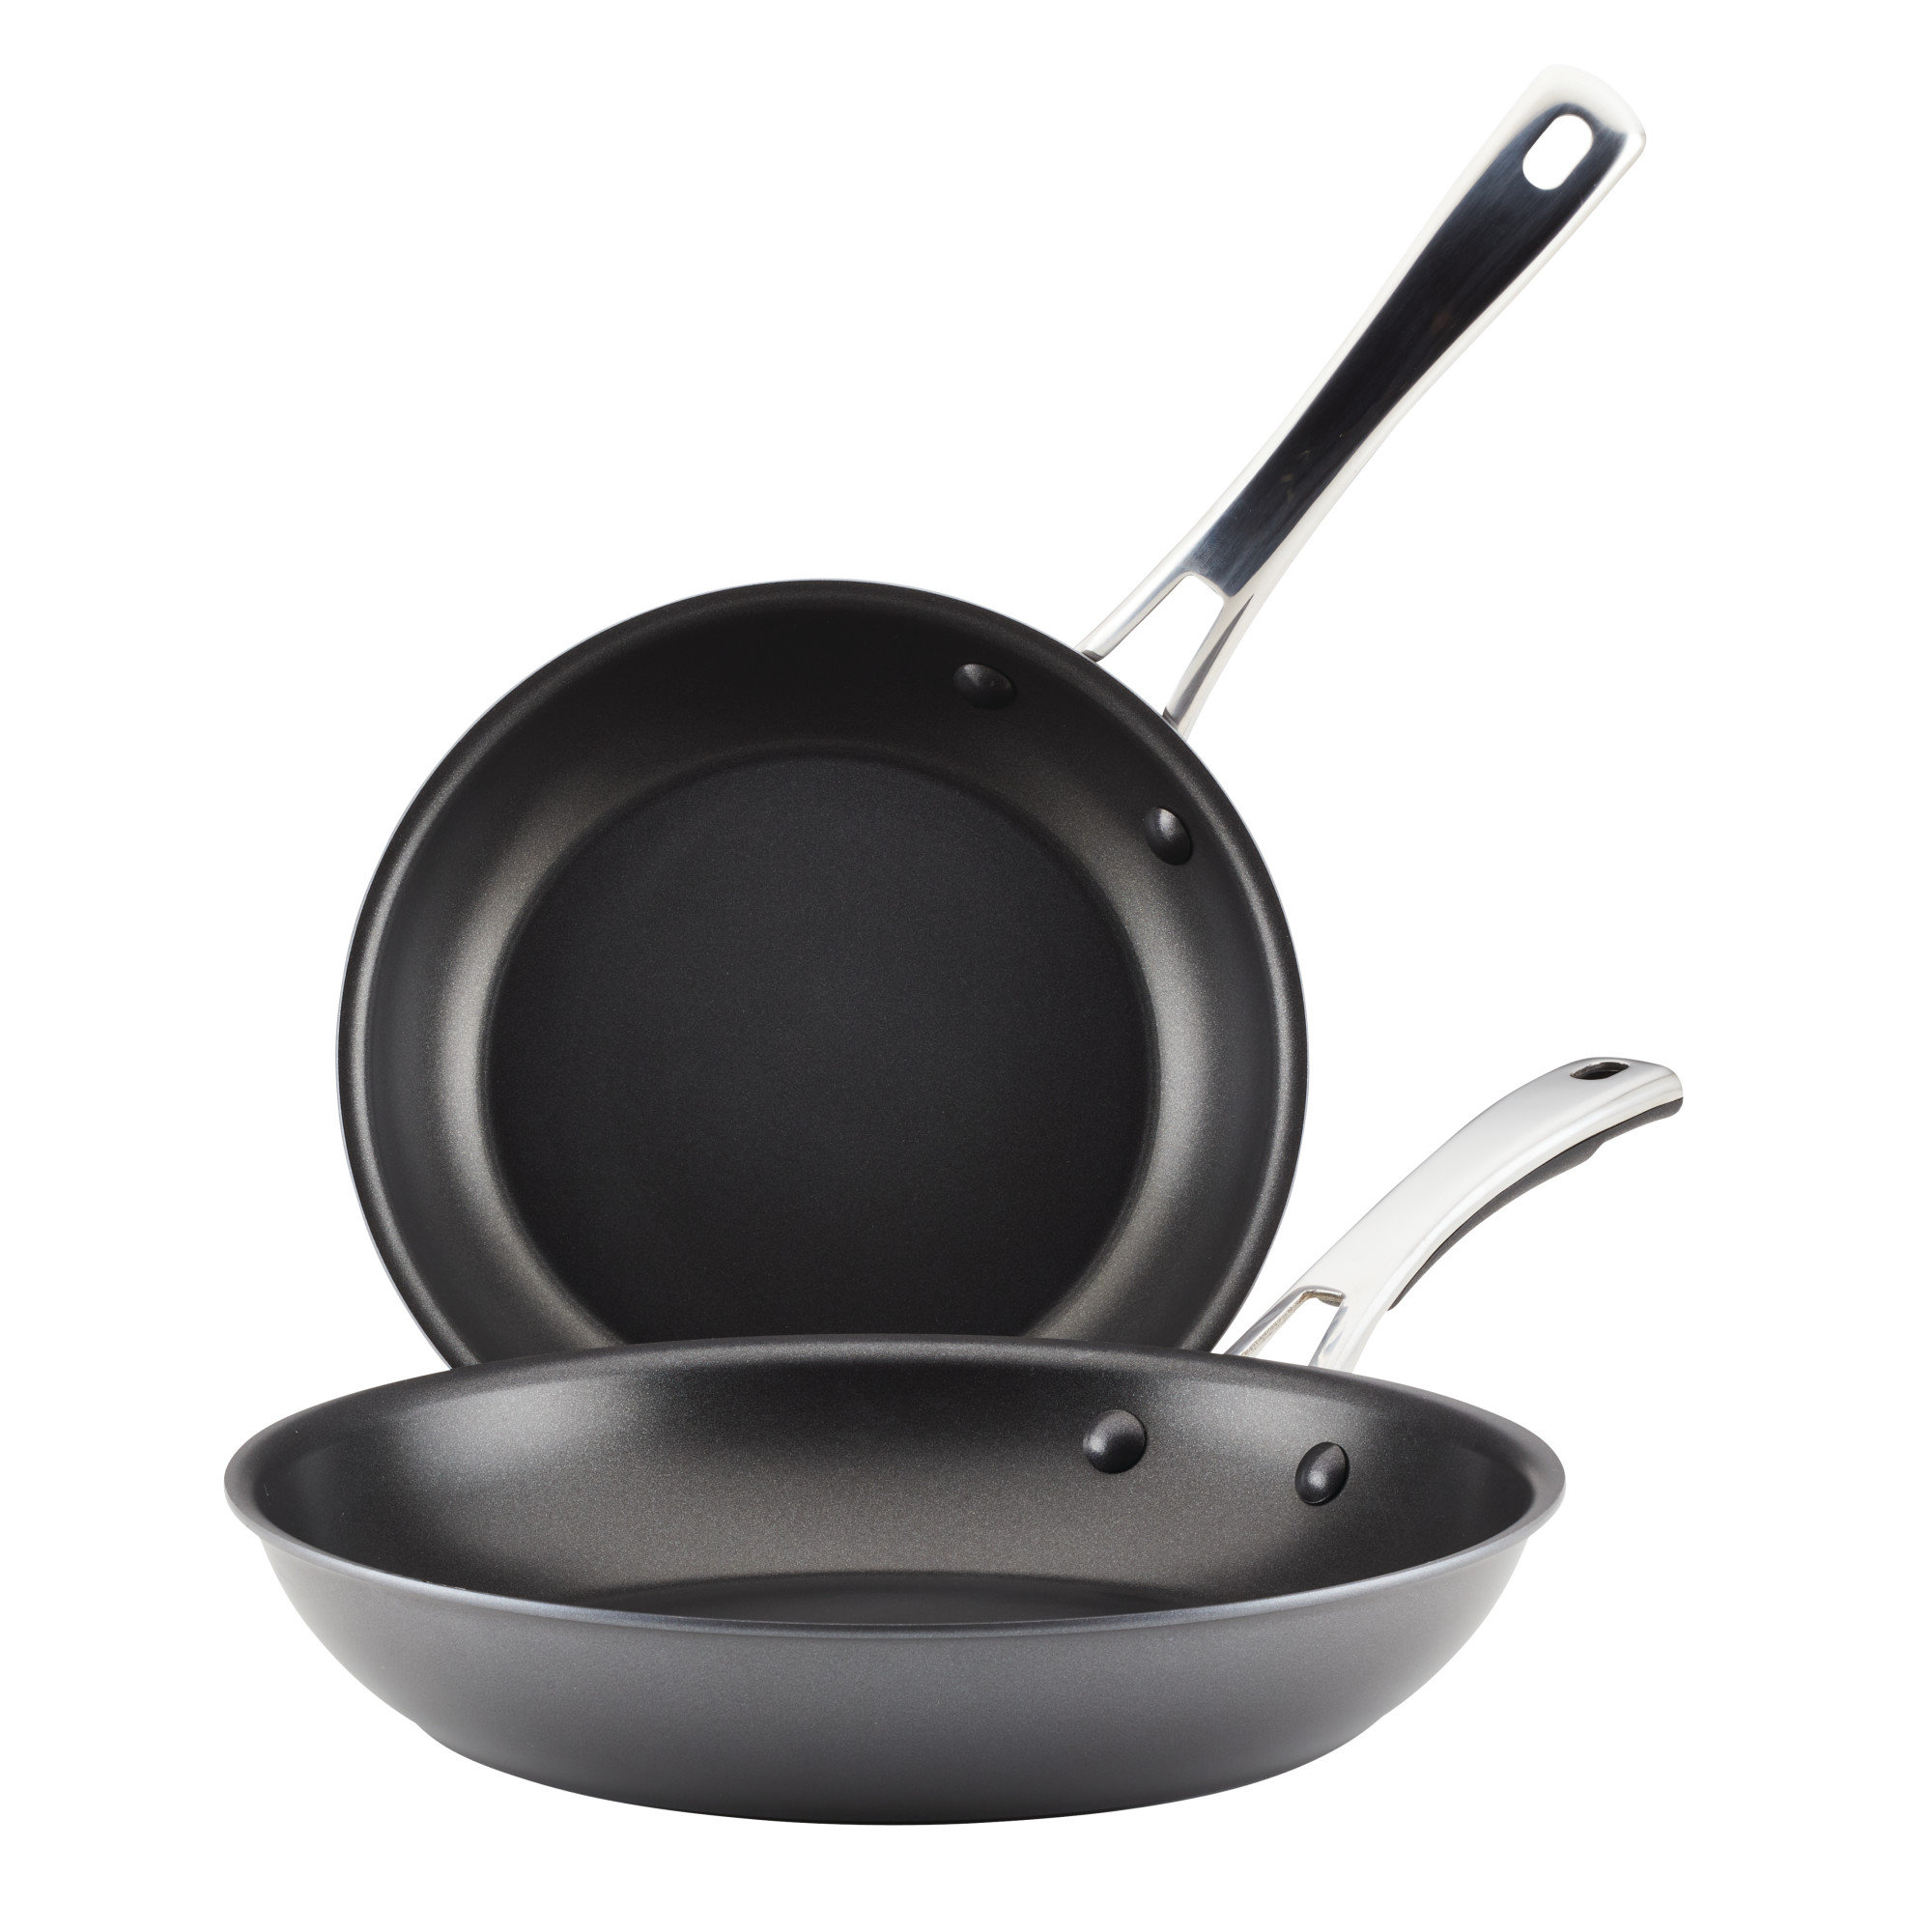 Rachael Ray 14-Inch Cucina Hard-Anodized Nonstick Skillet with